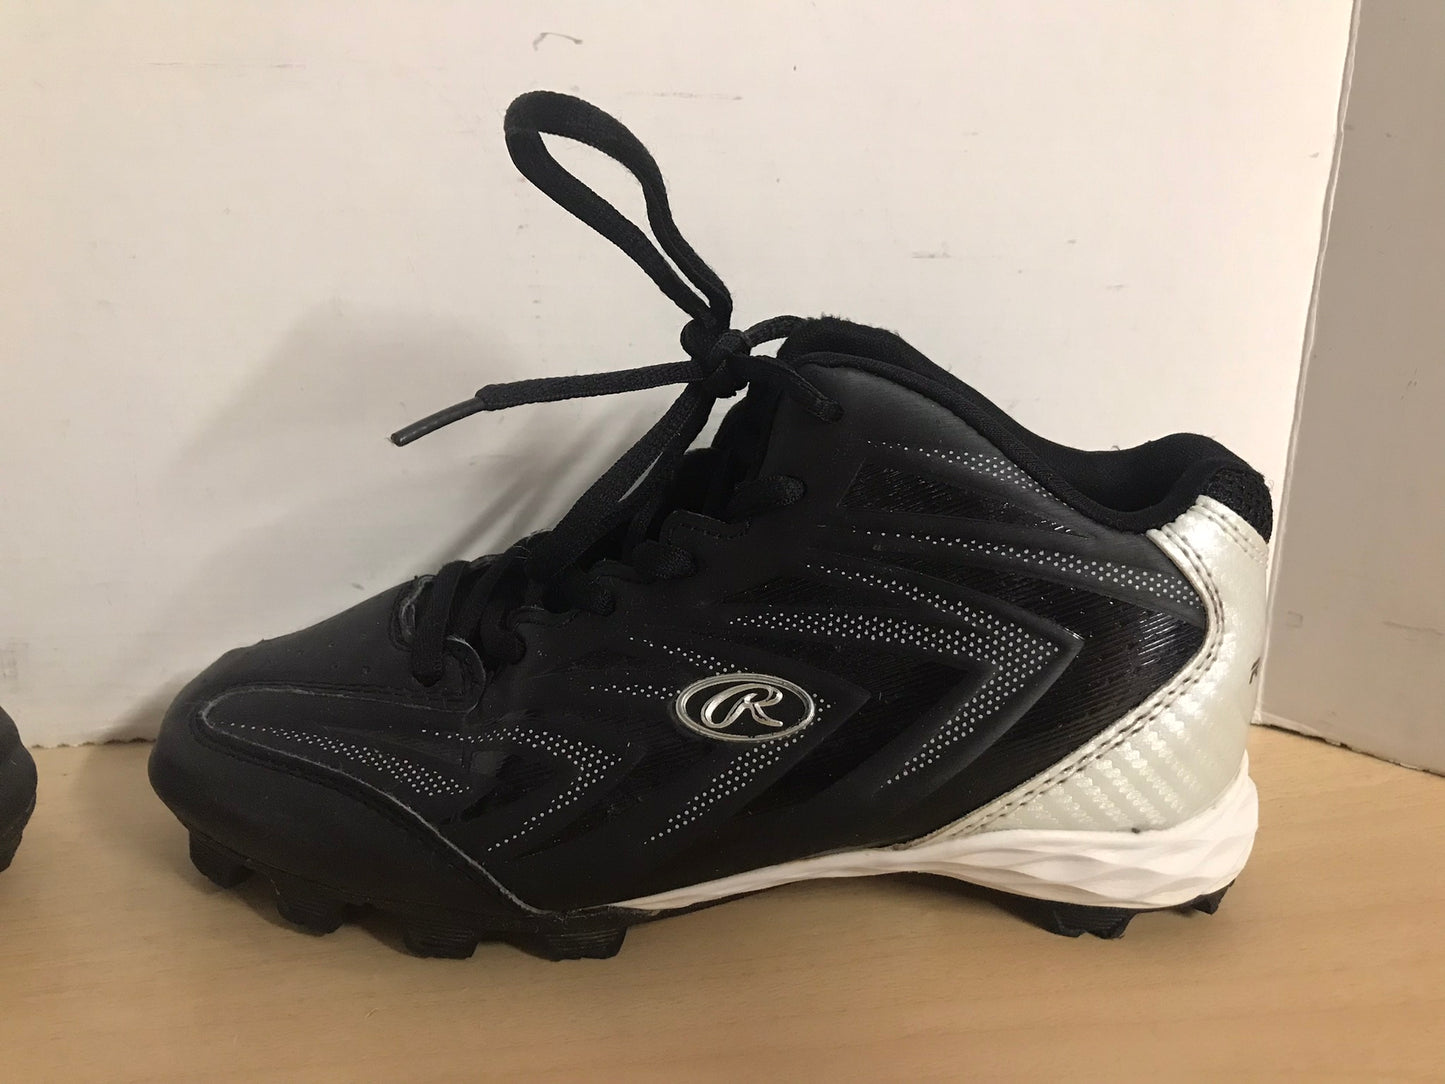 Baseball Shoes Cleats Child Size 3 Rawlings Black White High Top Minor Wear